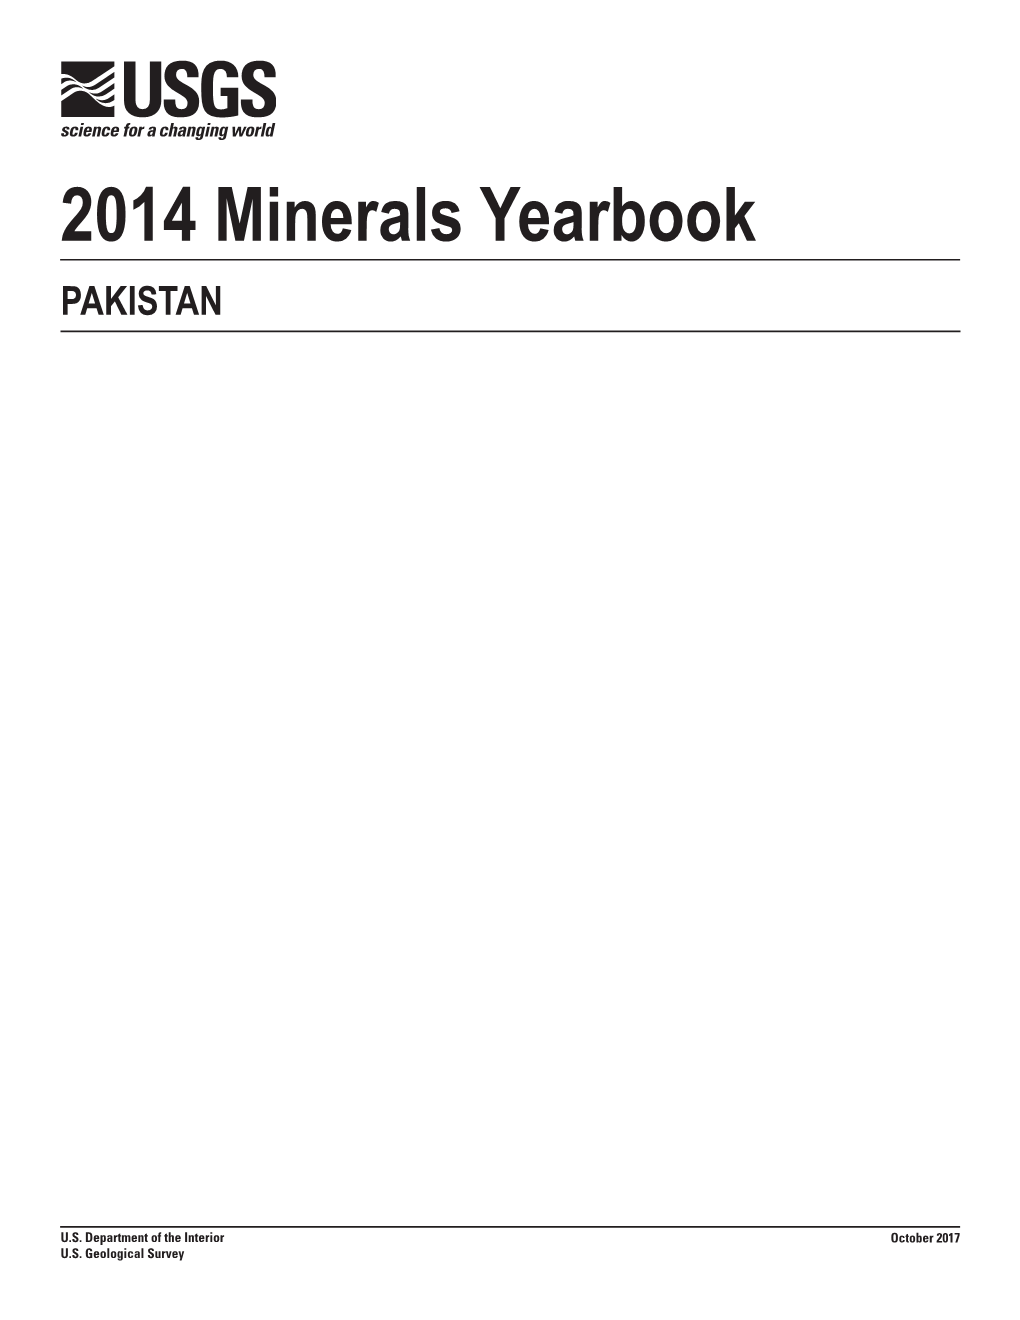 The Mineral Industry of Pakistan in 2014